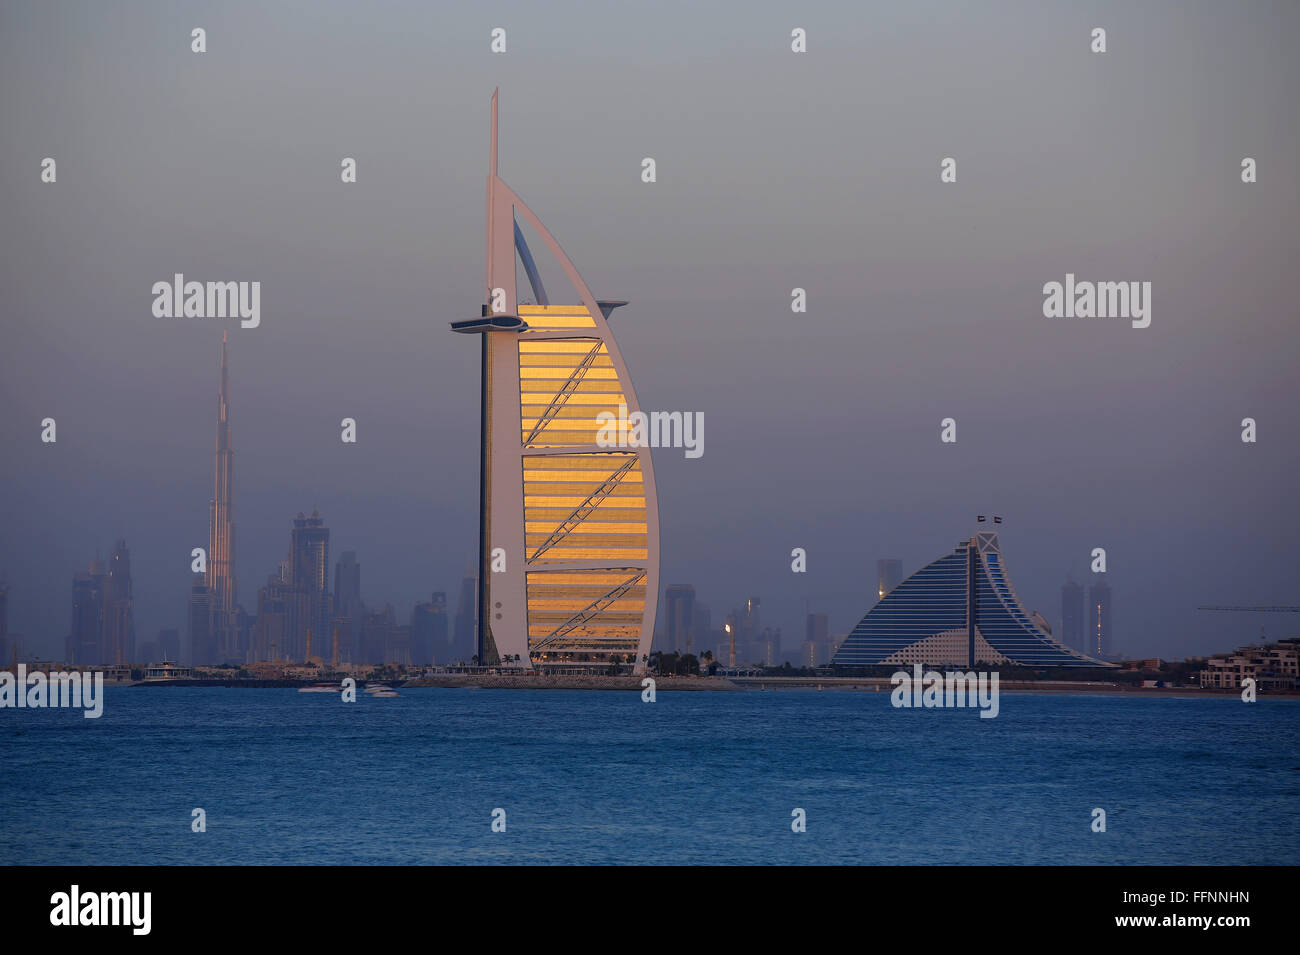 The skyline of Dubai, taken from Palm Jumeirah island, UAE, 09 February 2016. The picture was created from 5 individual shots as a High Dynamic Range Bild. PHOTO: KEVIN KUREK/DPA - NO WIRE SERVICE - Stock Photo